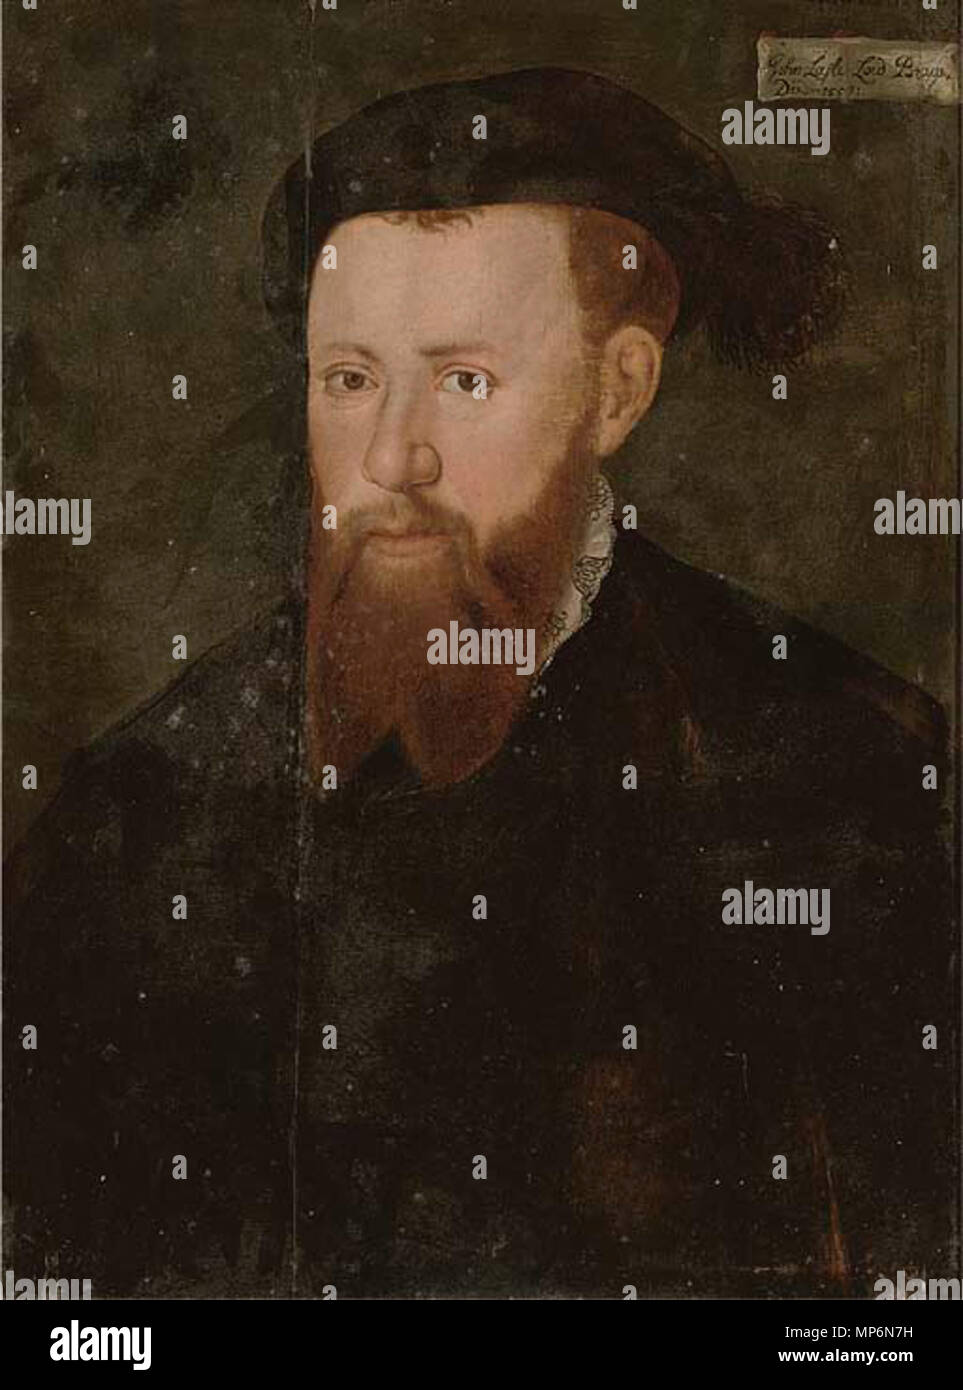 . English: John Bray, 2nd Baron Braye or Brays, (c. 1523 - 19 November 1557). Inscribed upper right 'John Laste Lord Brays/Died-155(4)' (or 1557). oil on panel, 257.8 × 42.5 cm (101.4 × 16.7 in). circa 1550.   Follower of George Gower  (1540–1596)     Alternative names Gower  Description English painter  Date of birth/death circa 1540 1596  Location of birth/death England London  Work period 1570s-1590s  Work location London  Authority control  : Q2126008 VIAF: 65226012 ISNI: 0000 0000 8251 2456 ULAN: 500032228 LCCN: nr00039827 GND: 135583837 WorldCat 731 John Bray, 2nd Lord Braye Stock Photo